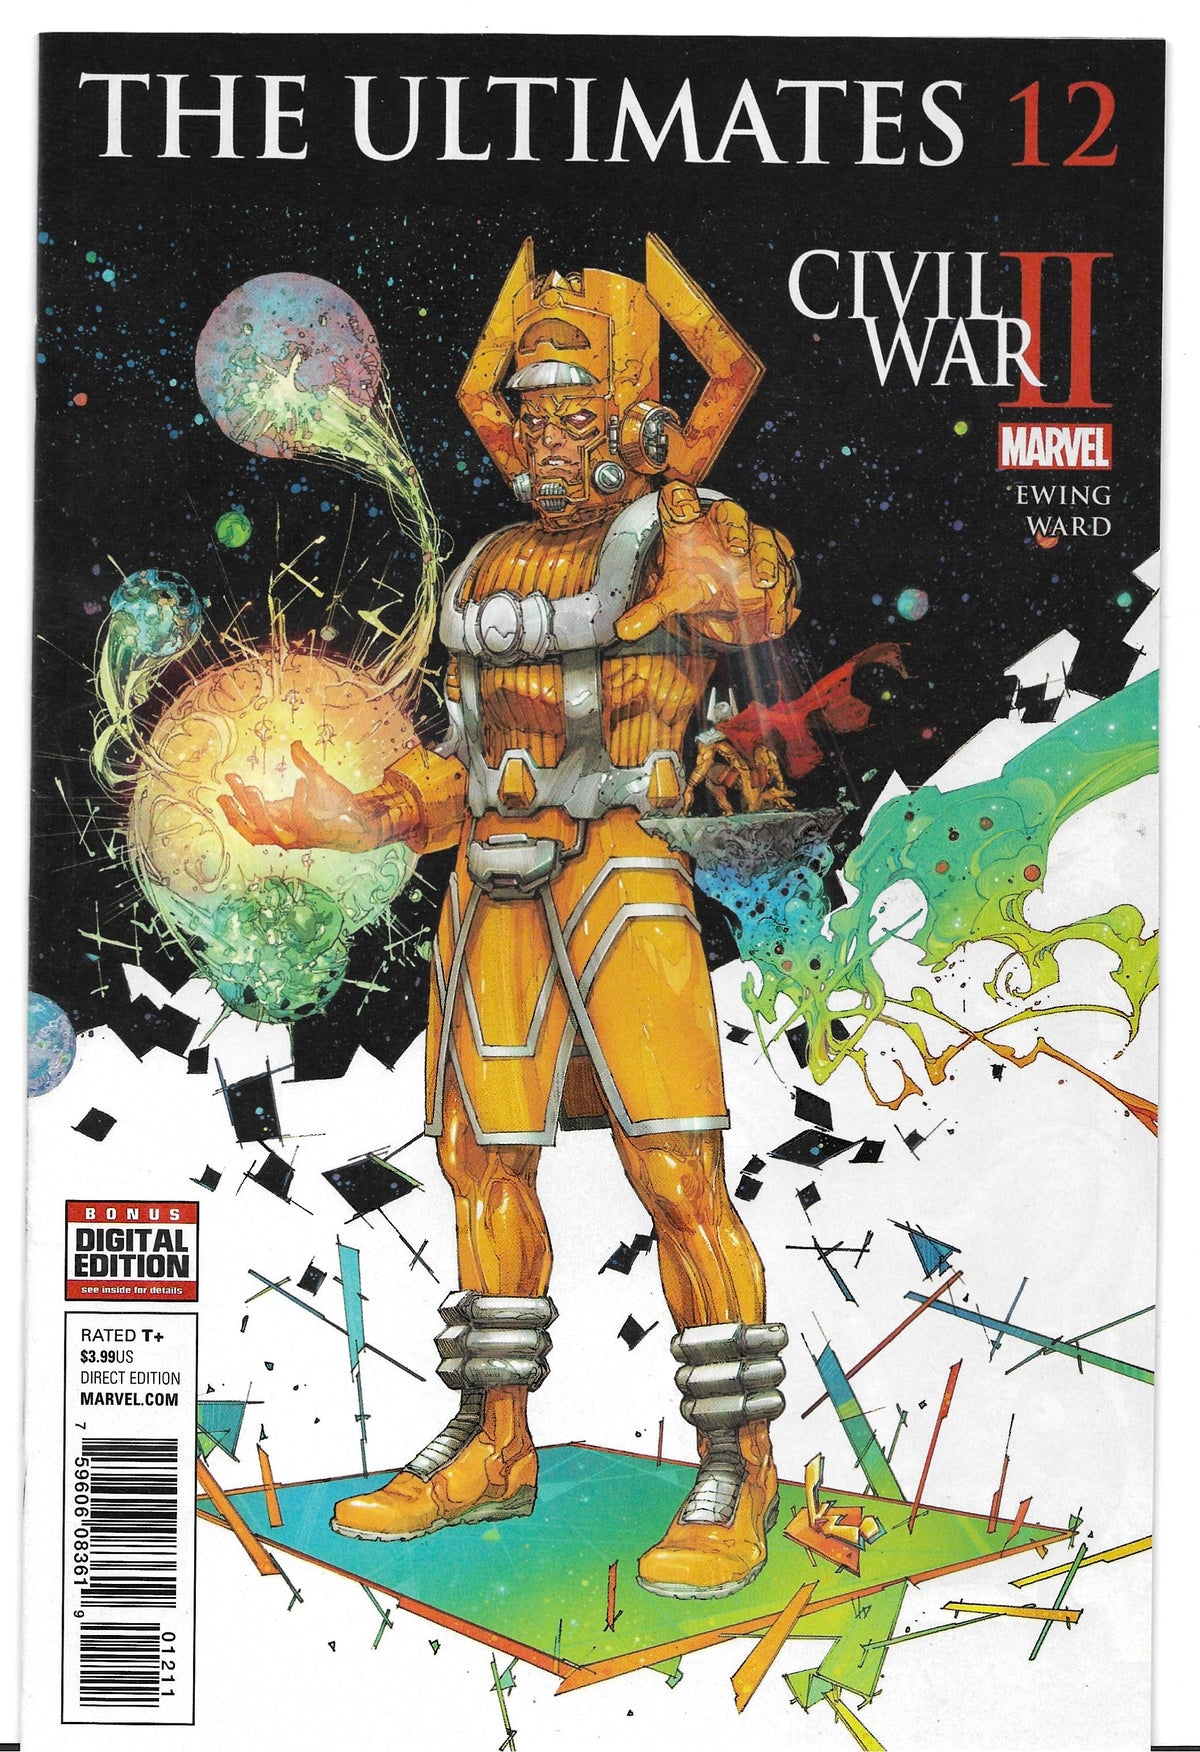 Photo of Ultimates Issue 12 Cw2 comic Sold by Stronghold Collectibles